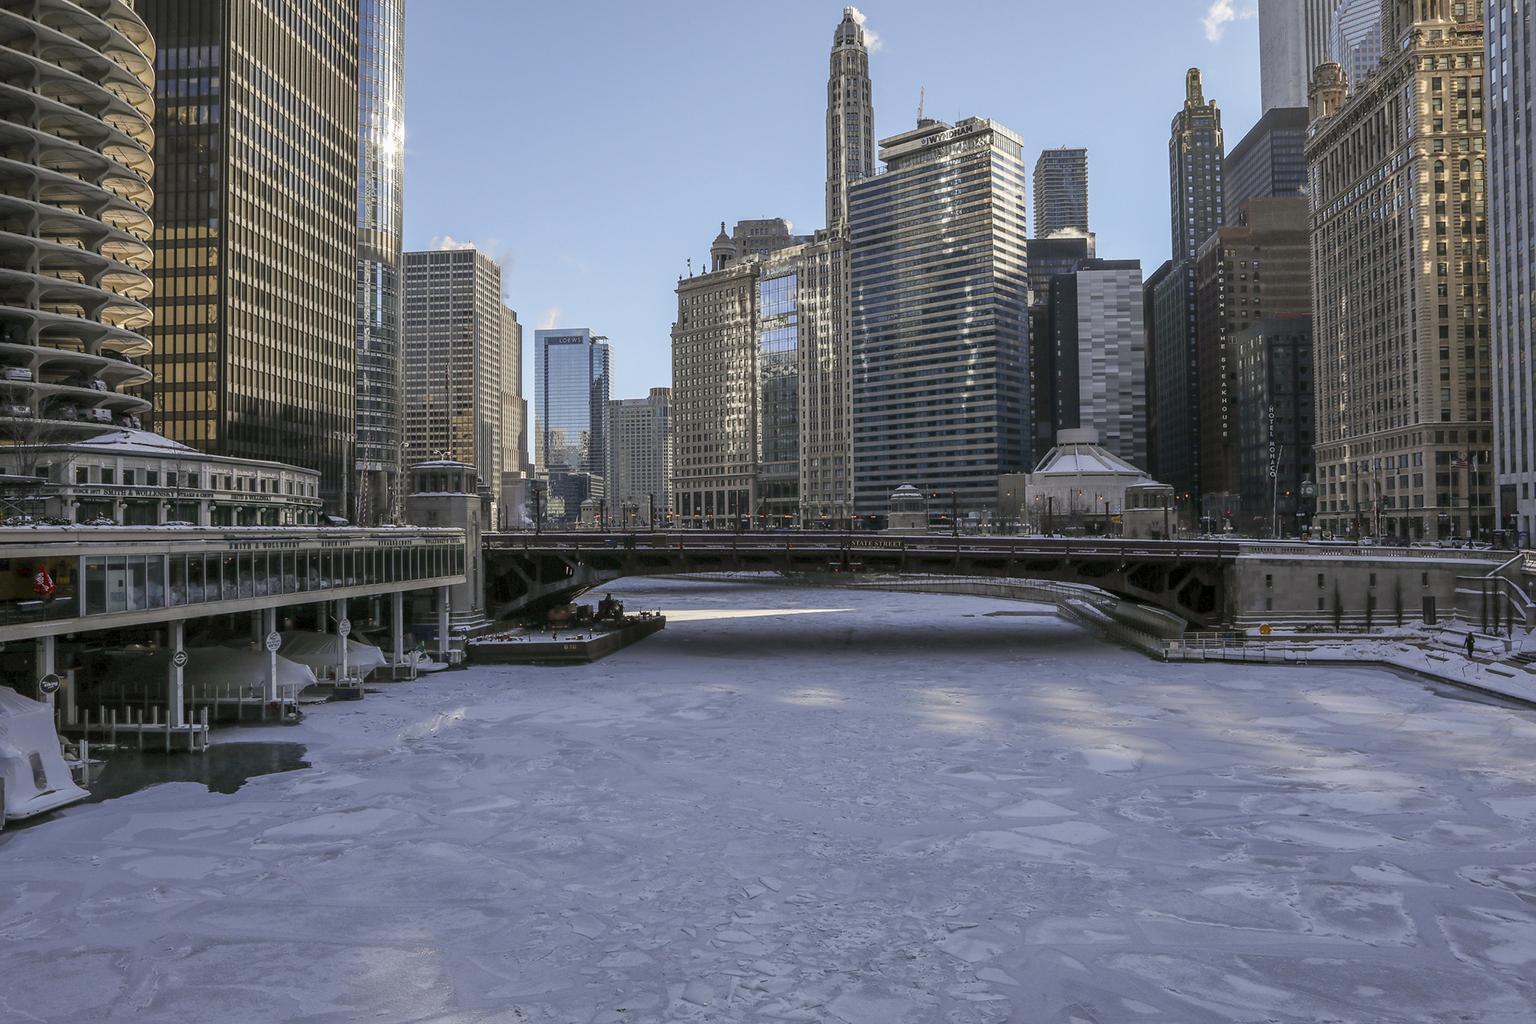 Ice covers the Chicago River on Wednesday, Jan. 30, 2019. A deadly arctic deep freeze enveloped the Midwest with record-breaking temperatures triggering widespread closures of schools and businesses. (AP Photo / Teresa Crawford)